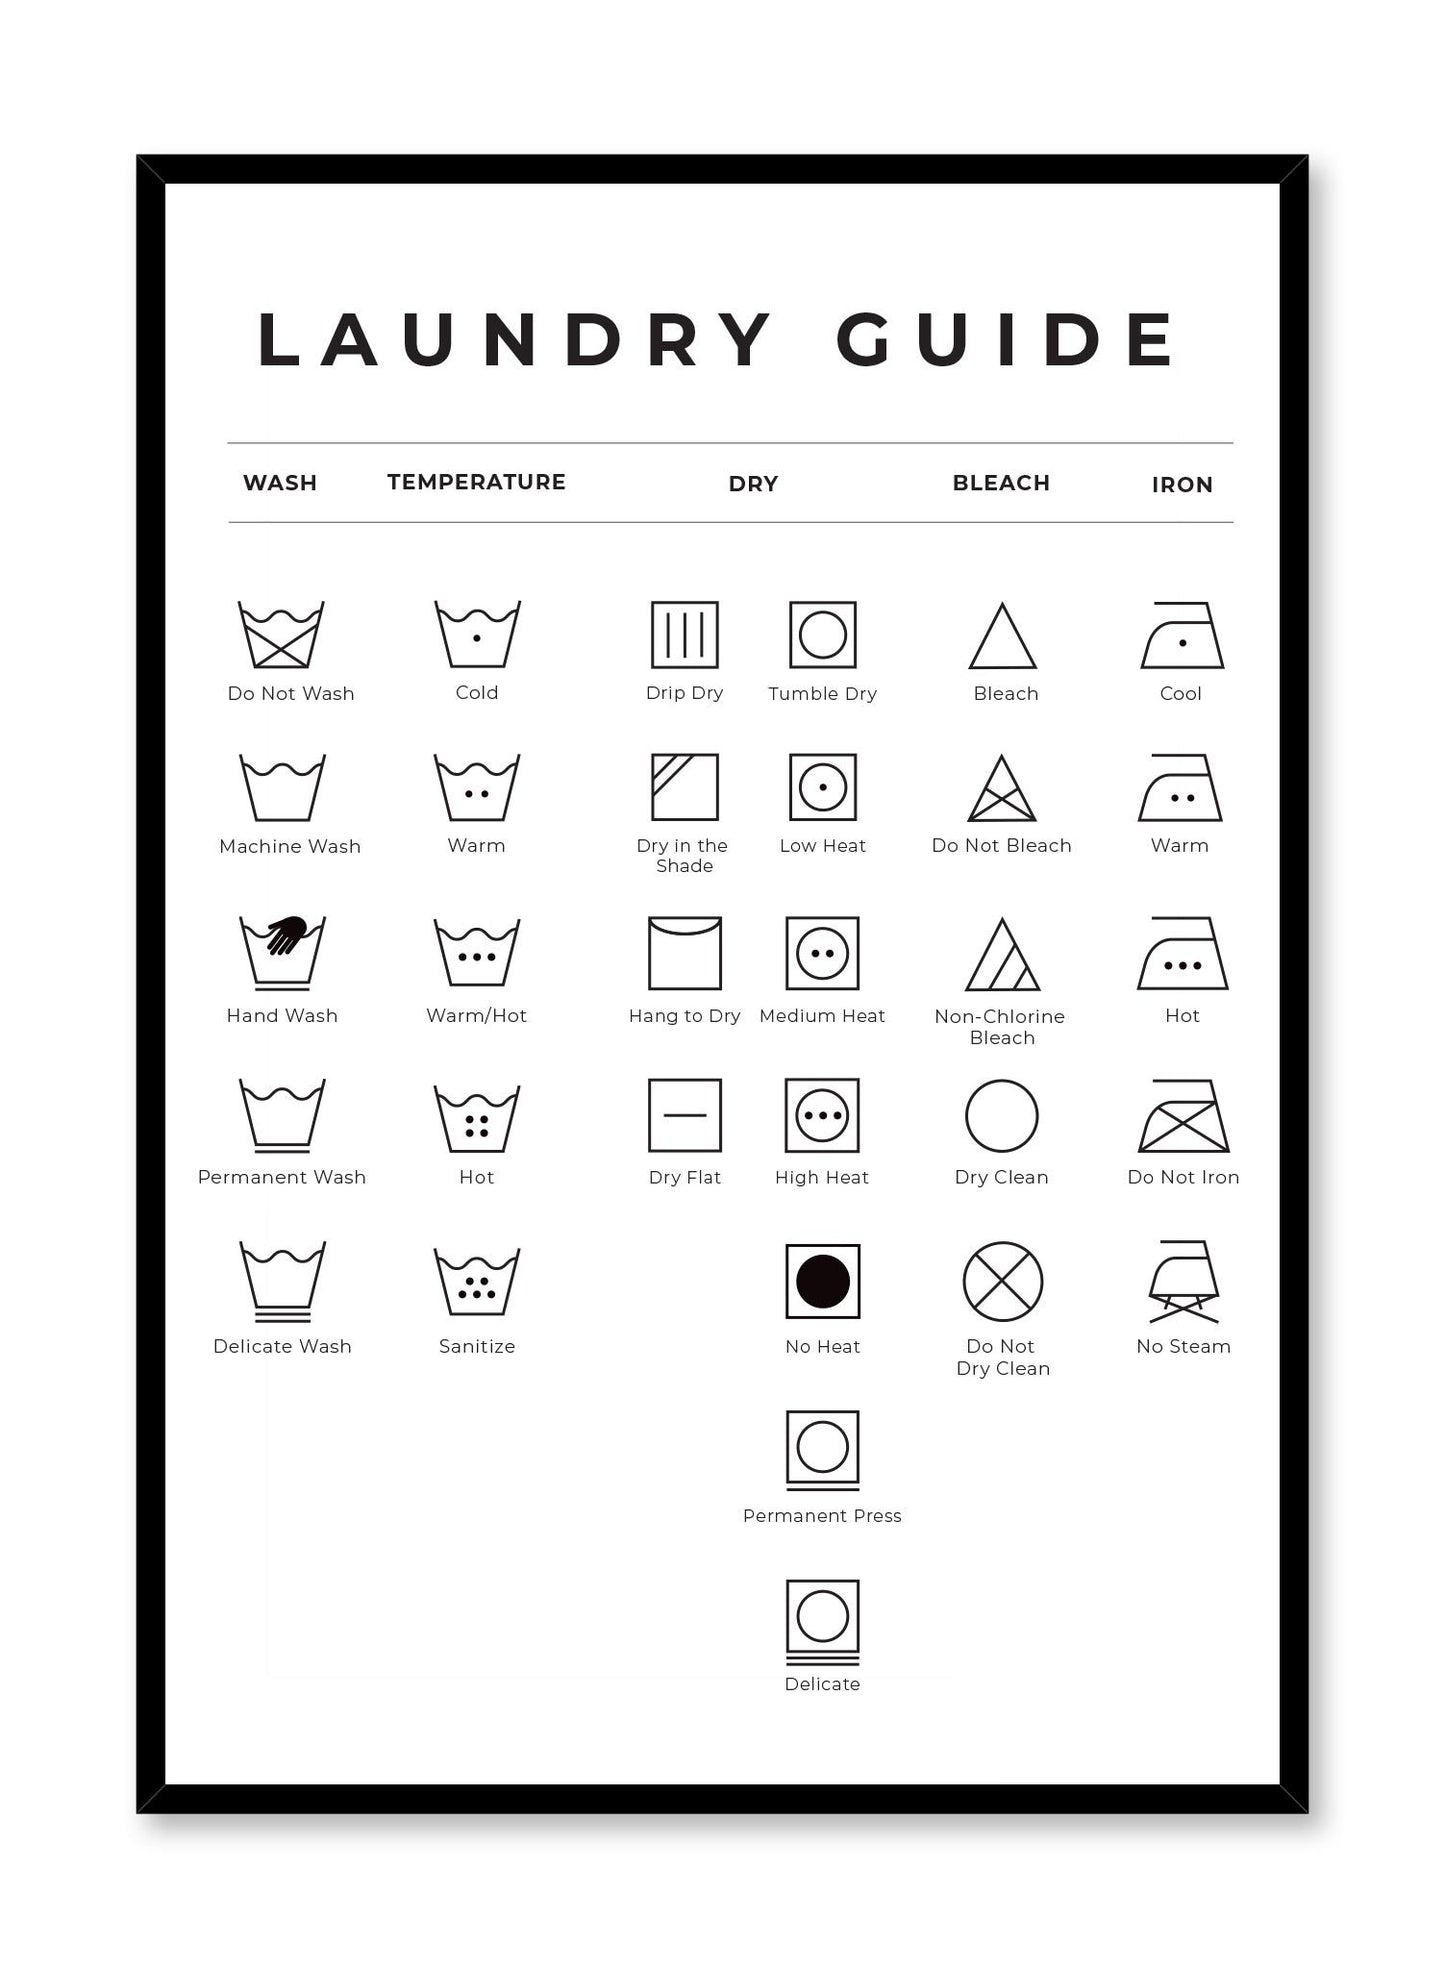 Laundry Guide is a minimalist typography by Opposite Wall of a chart of laundry symbols and their meaning. 